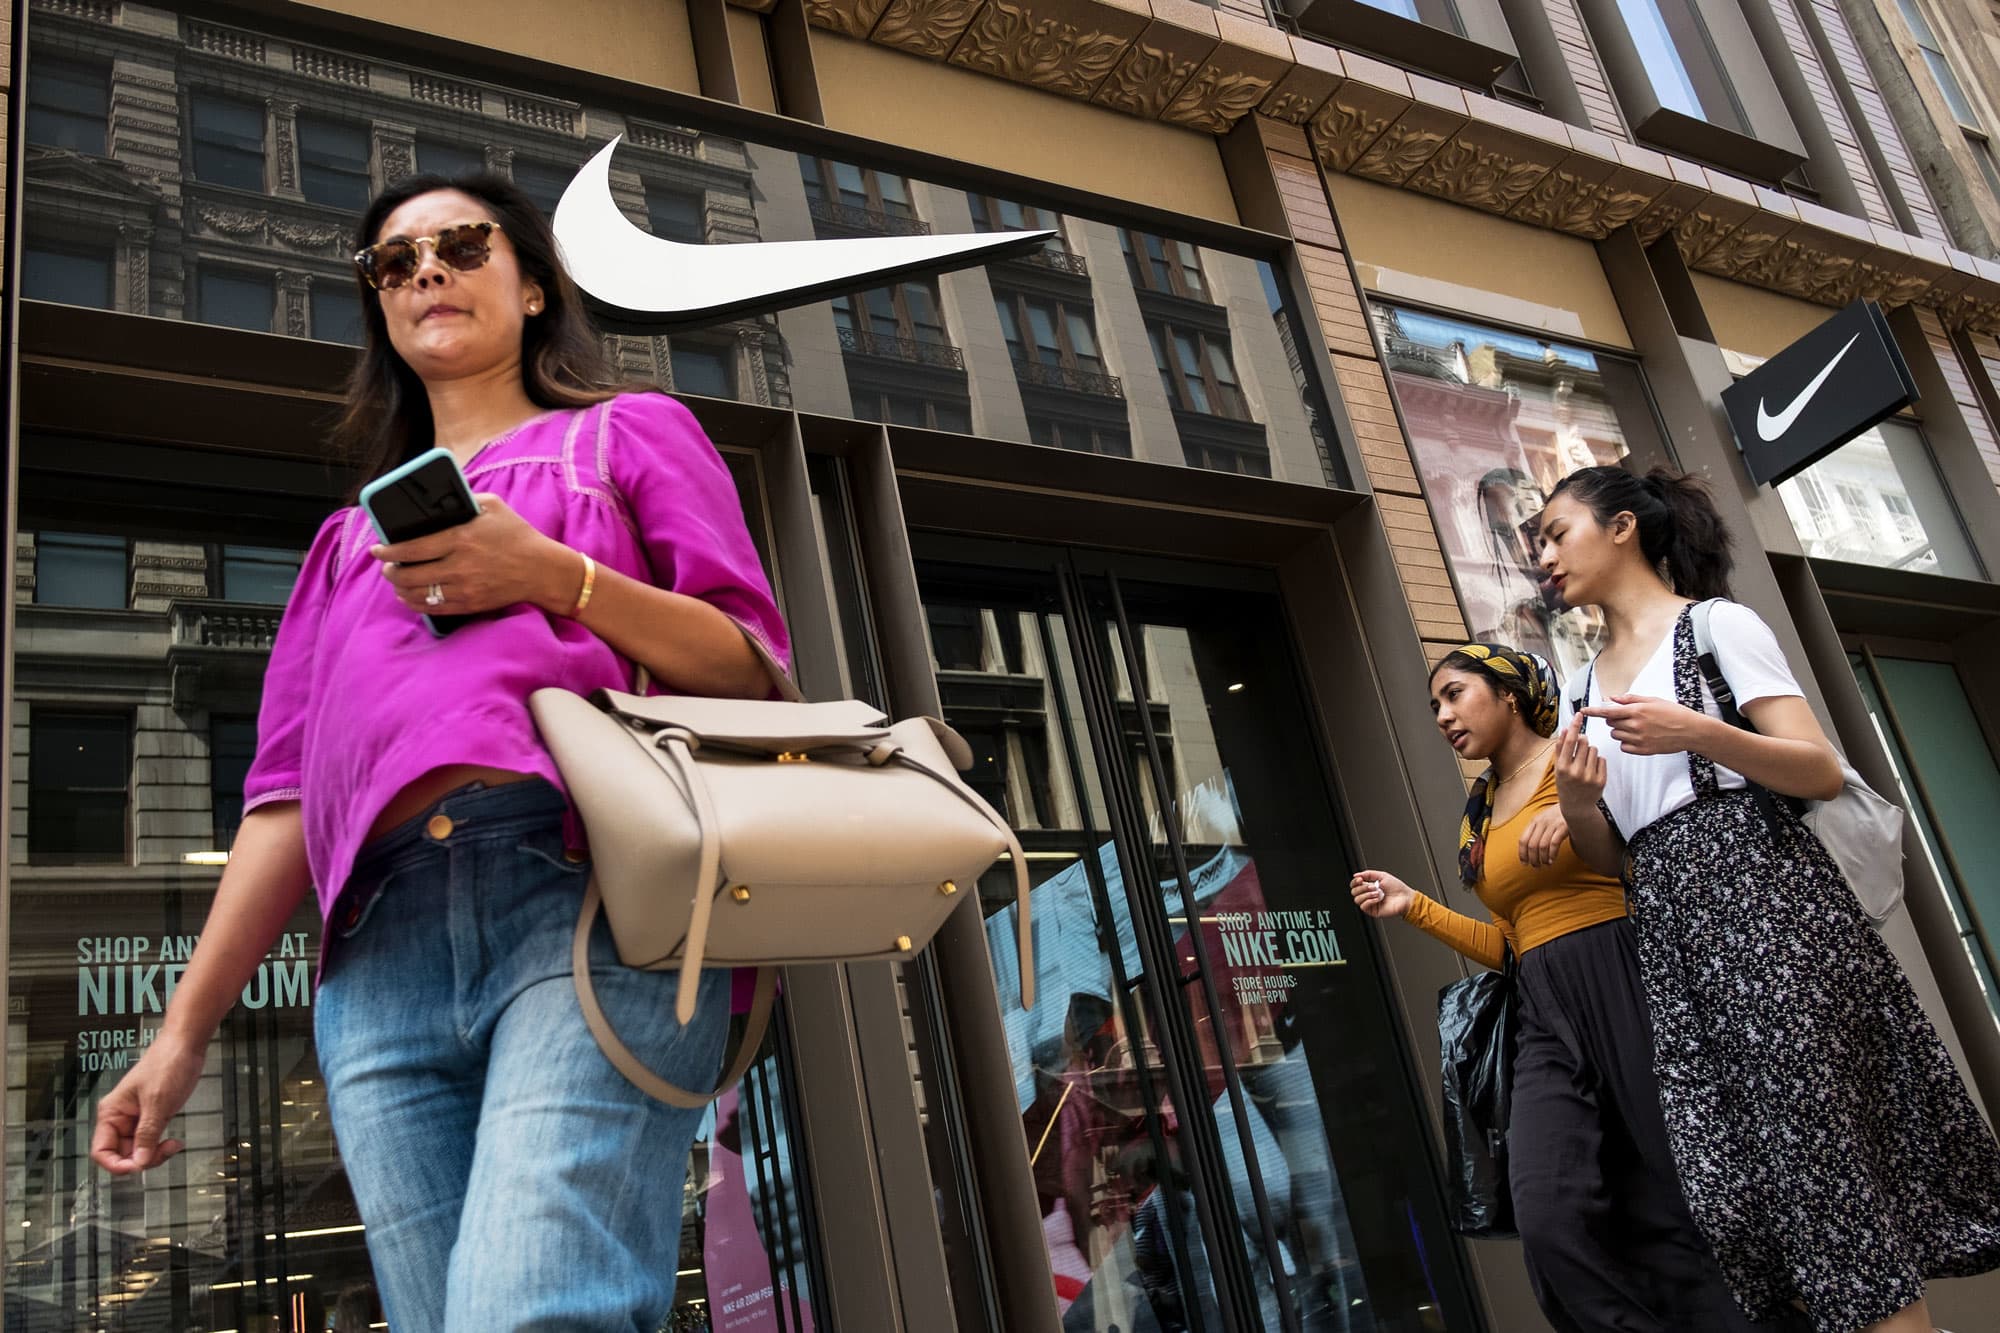 nike acquires celect